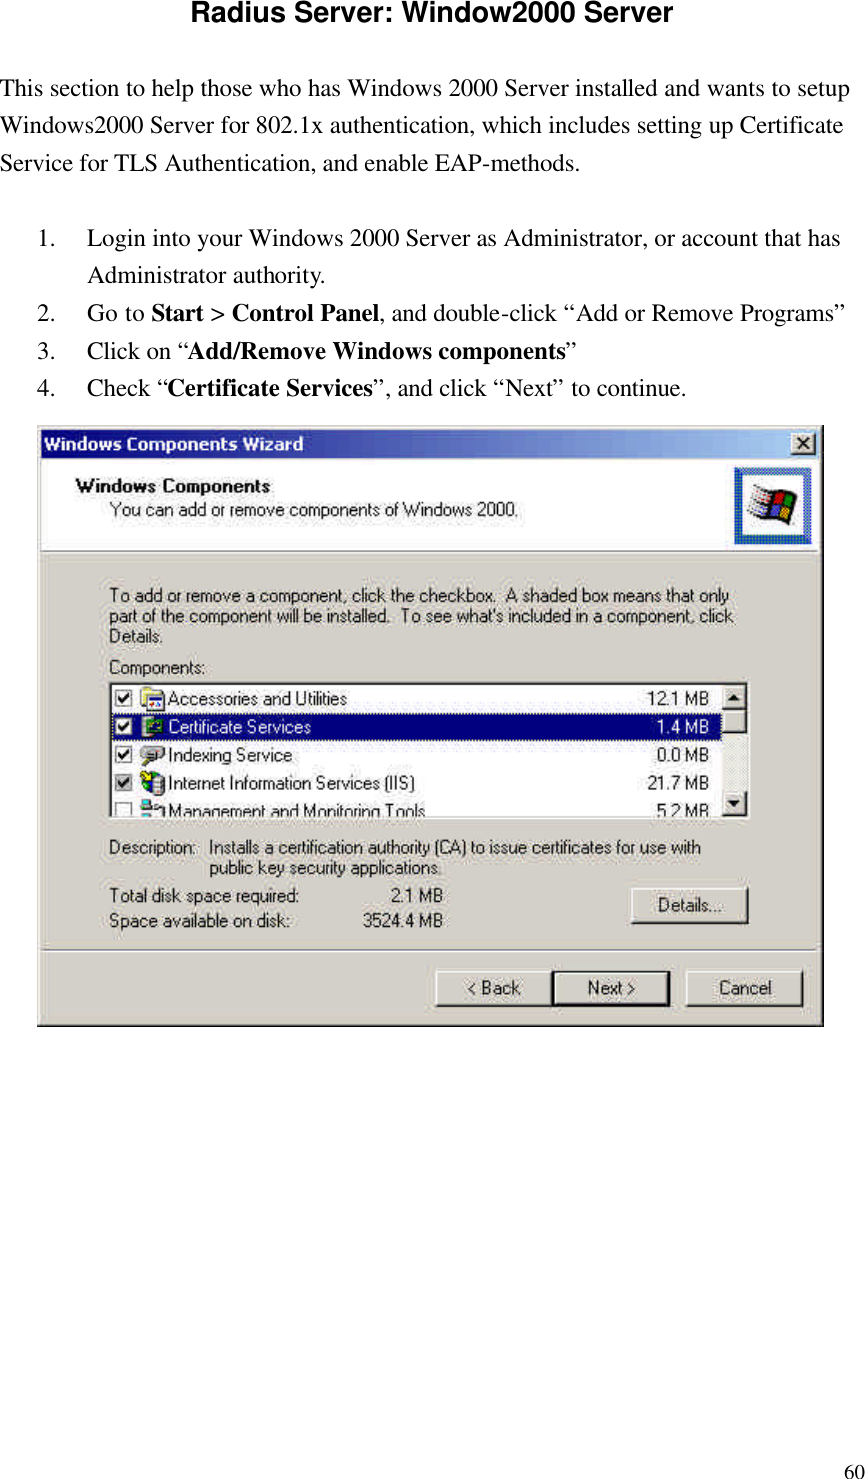  60Radius Server: Window2000 Server This section to help those who has Windows 2000 Server installed and wants to setup Windows2000 Server for 802.1x authentication, which includes setting up Certificate Service for TLS Authentication, and enable EAP-methods.  1. Login into your Windows 2000 Server as Administrator, or account that has Administrator authority. 2. Go to Start &gt; Control Panel, and double-click “Add or Remove Programs” 3. Click on “Add/Remove Windows components” 4. Check “Certificate Services”, and click “Next” to continue.           